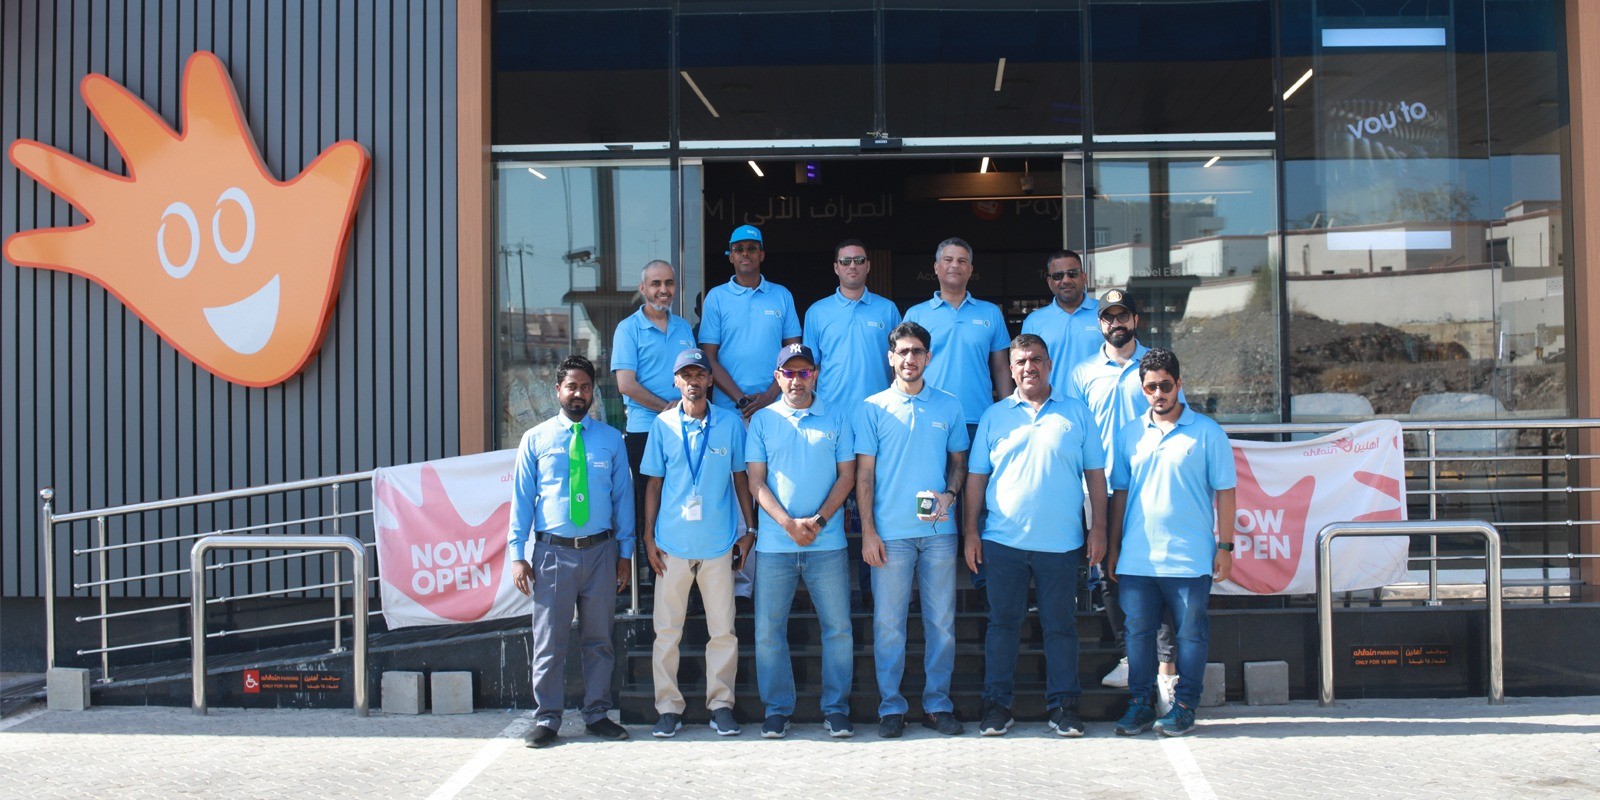 OMAN OIL MARKETING COMPANY INTERACTS WITH CUSTOMERS AT SERVICE STATIONS ACROSS OMAN